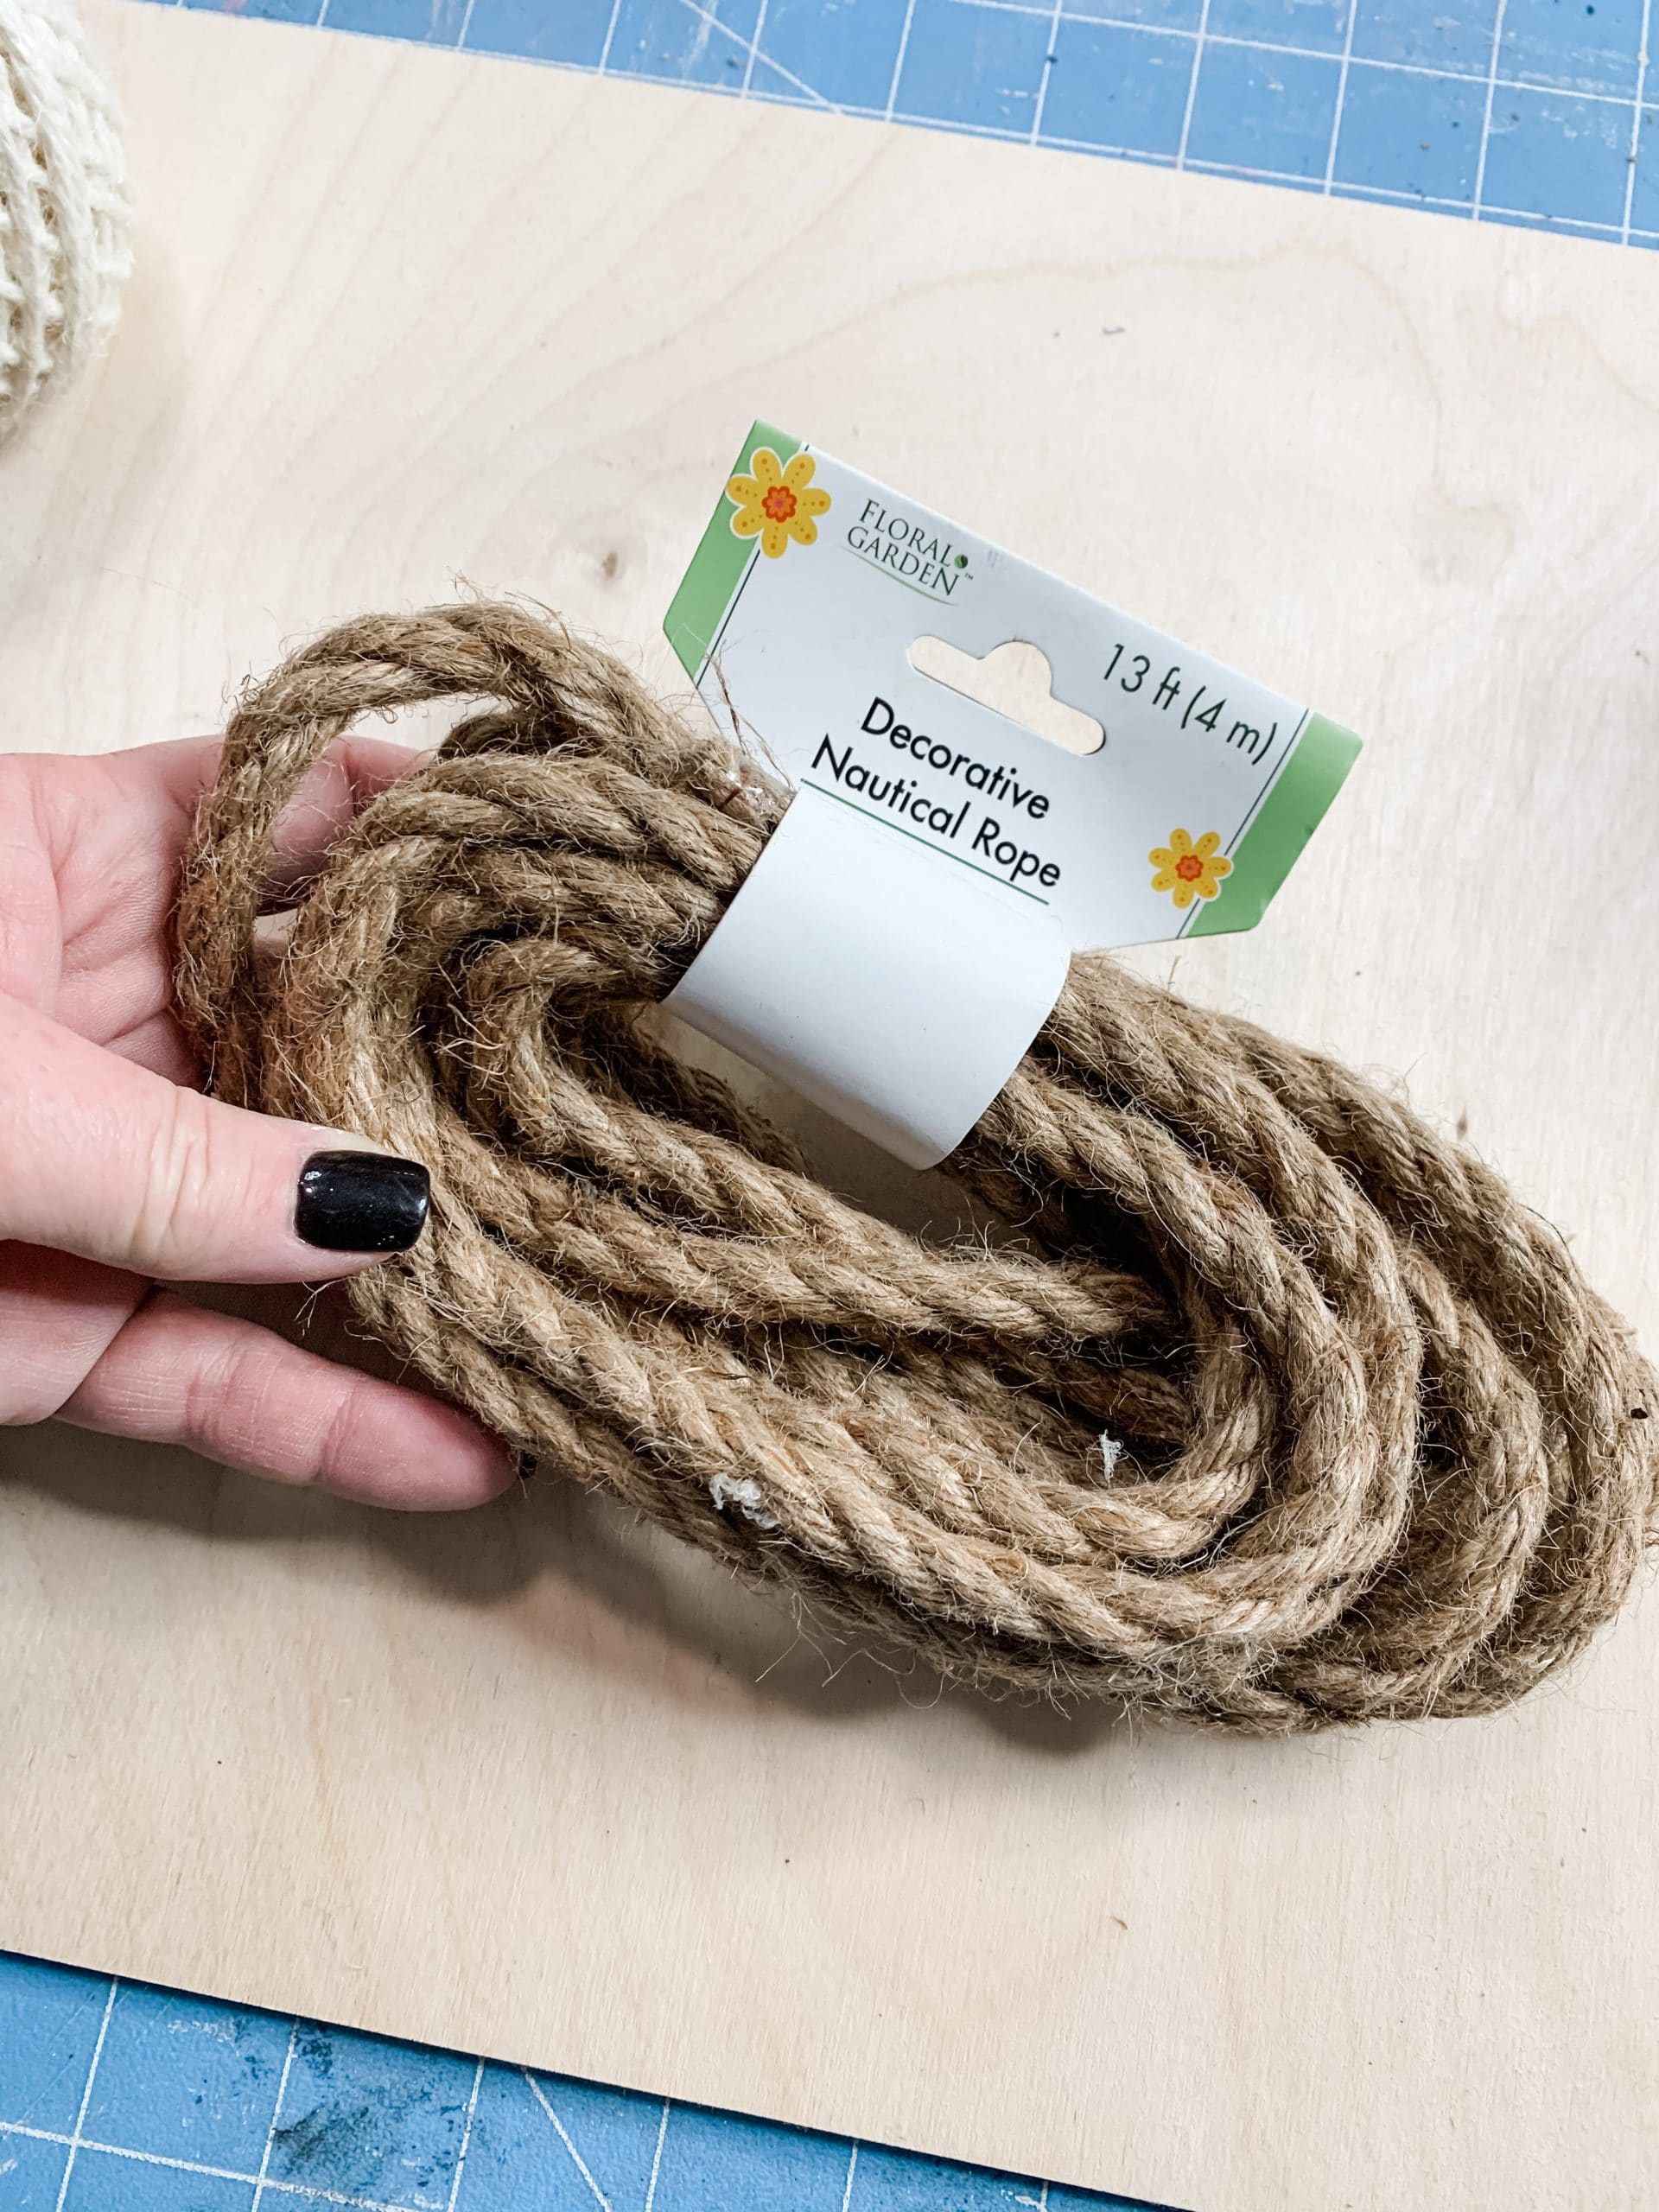 https://www.themakersmap.com/wp-content/uploads/2020/03/dollar-tree-nautical-rope-scaled.jpg